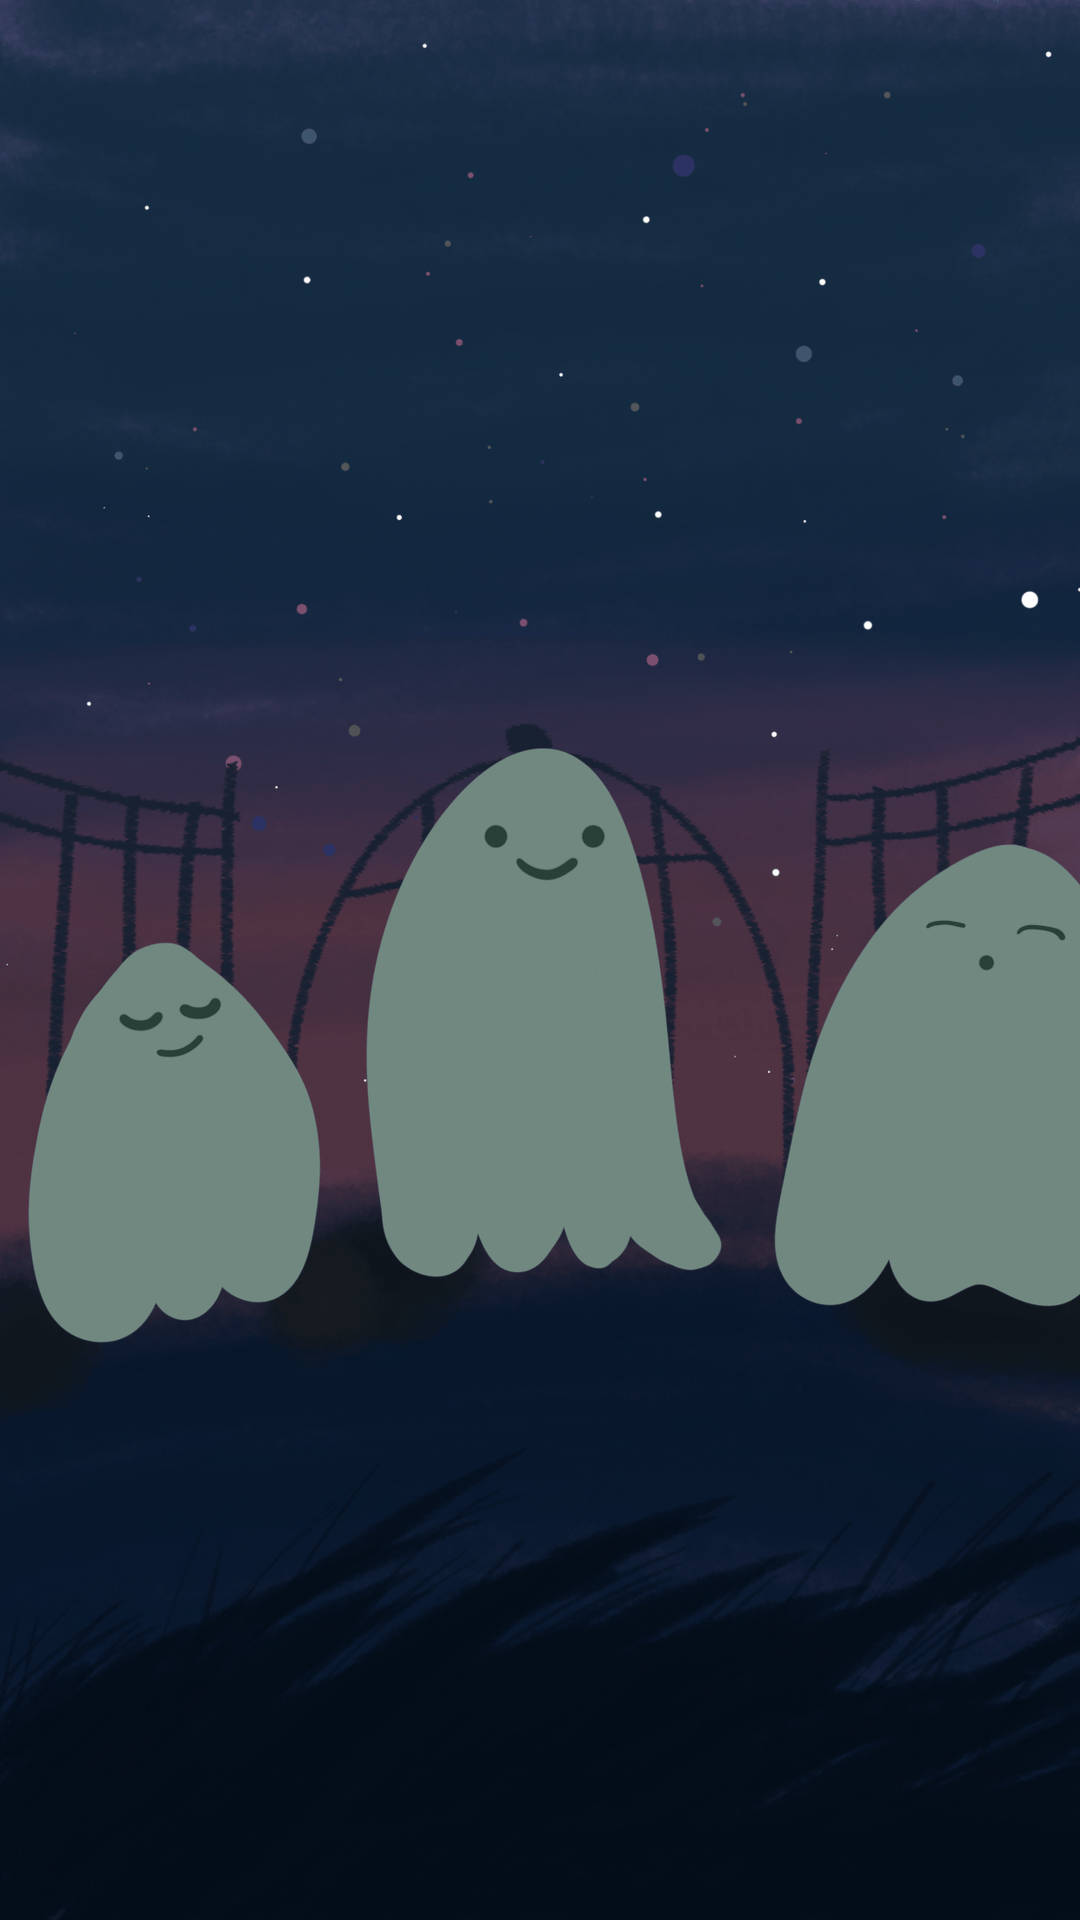 Three Ghost Aesthetic At Night Wallpaper